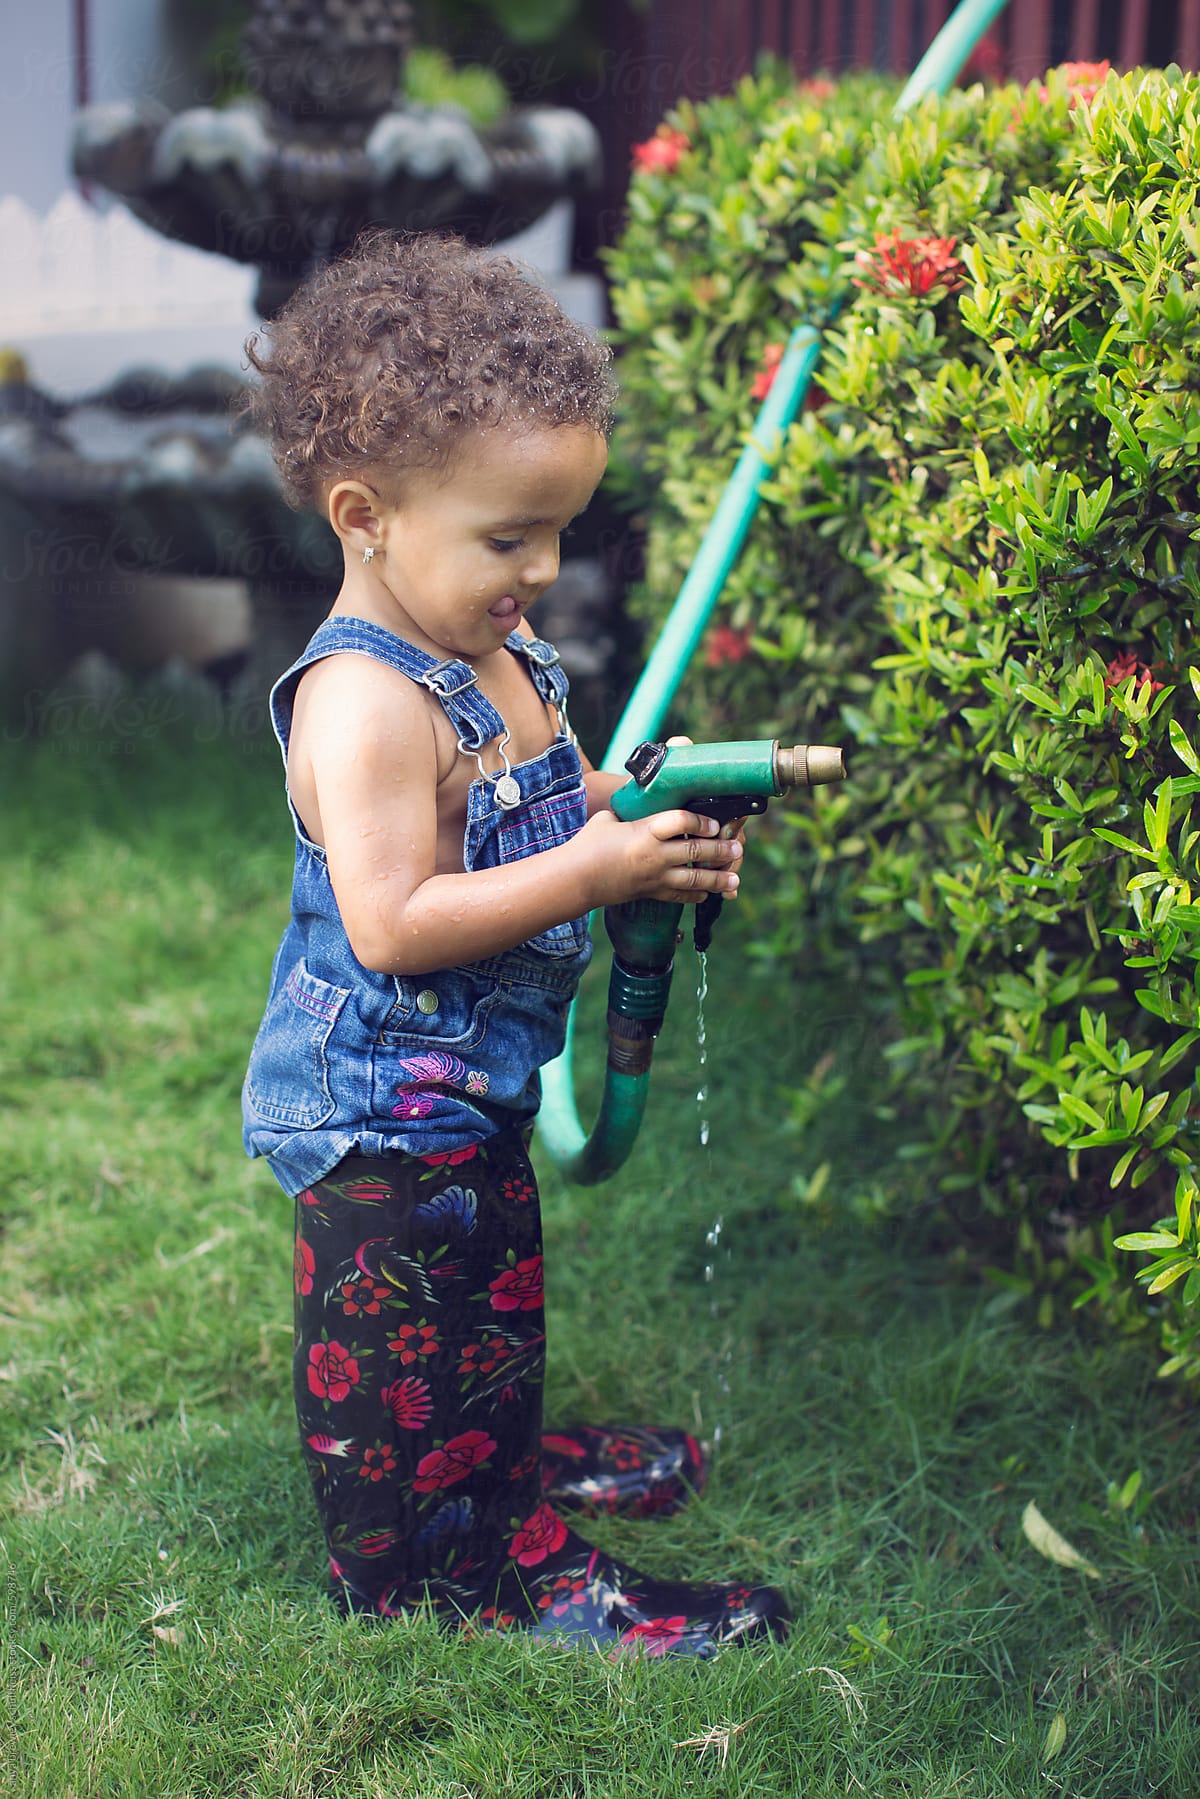 A  toddler child playing with a garden hose